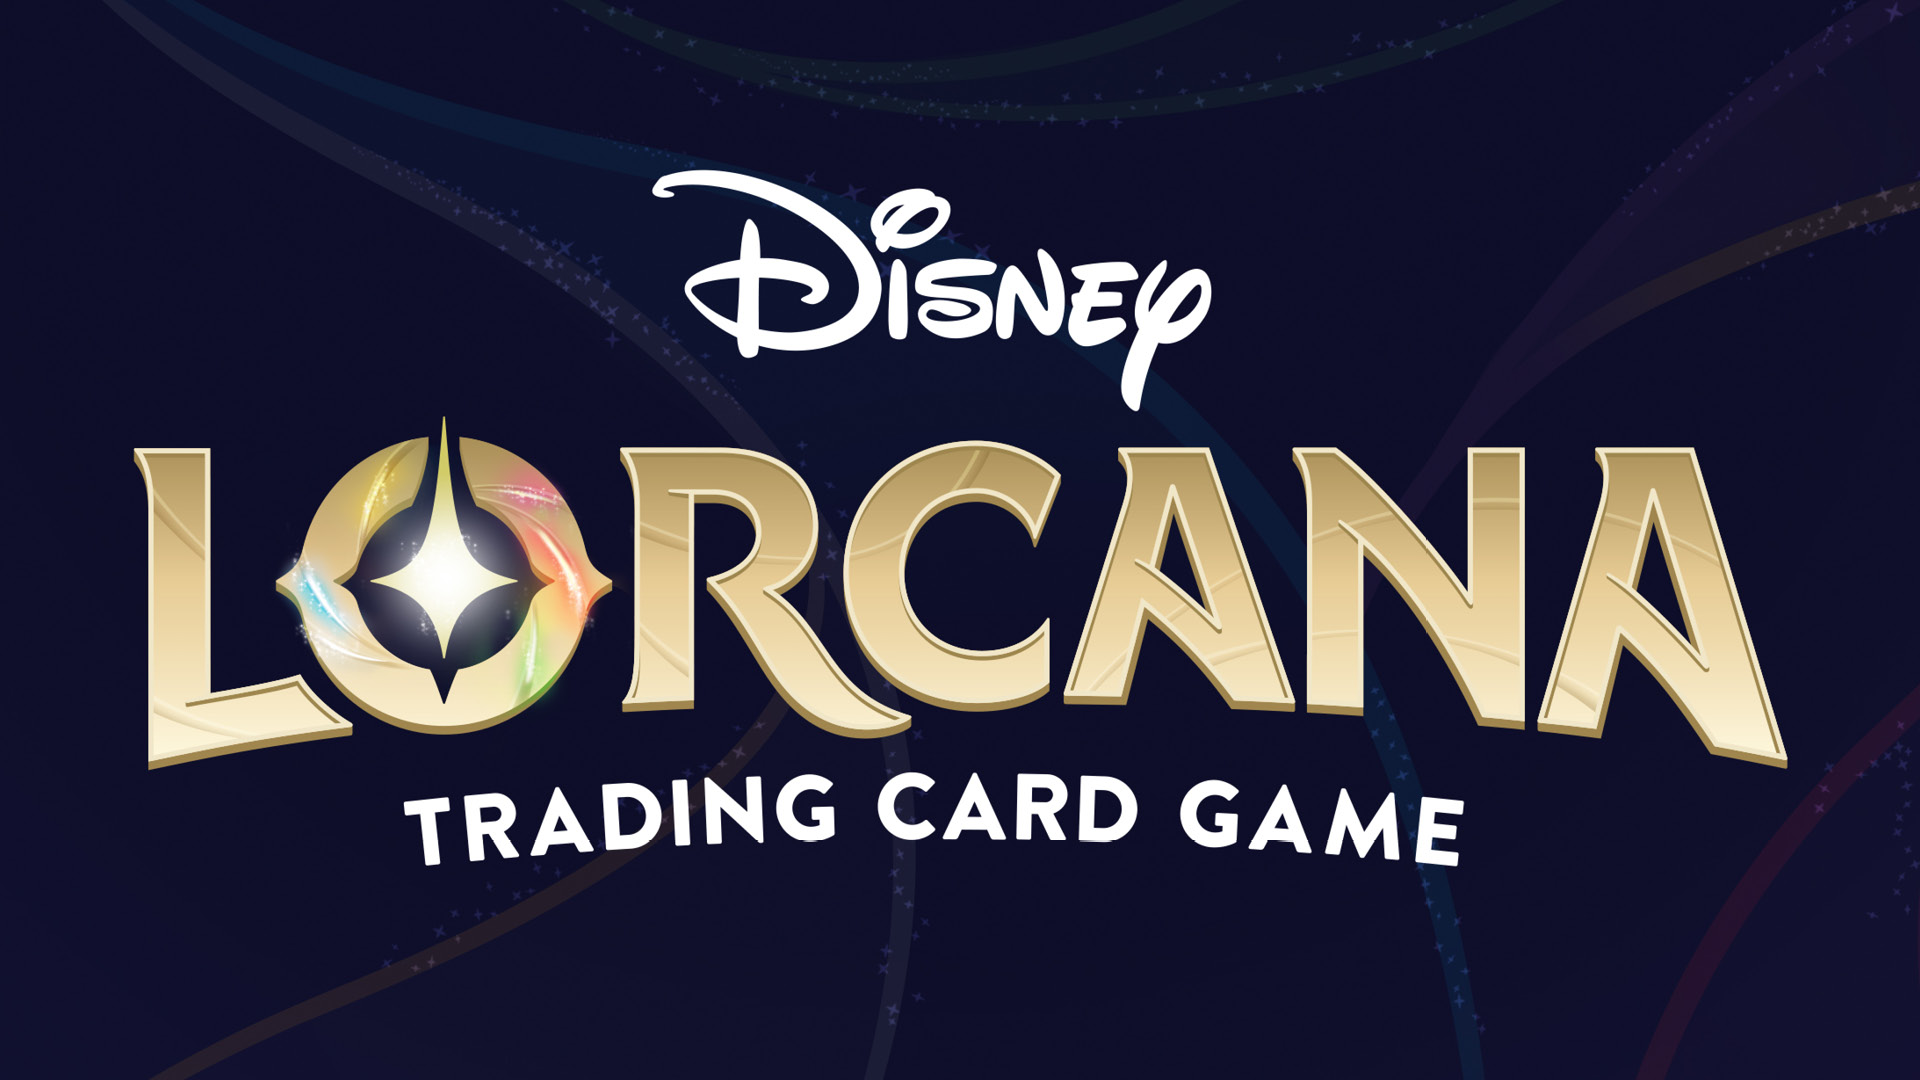 People will feel our love for Disney in this game': Lorcana co